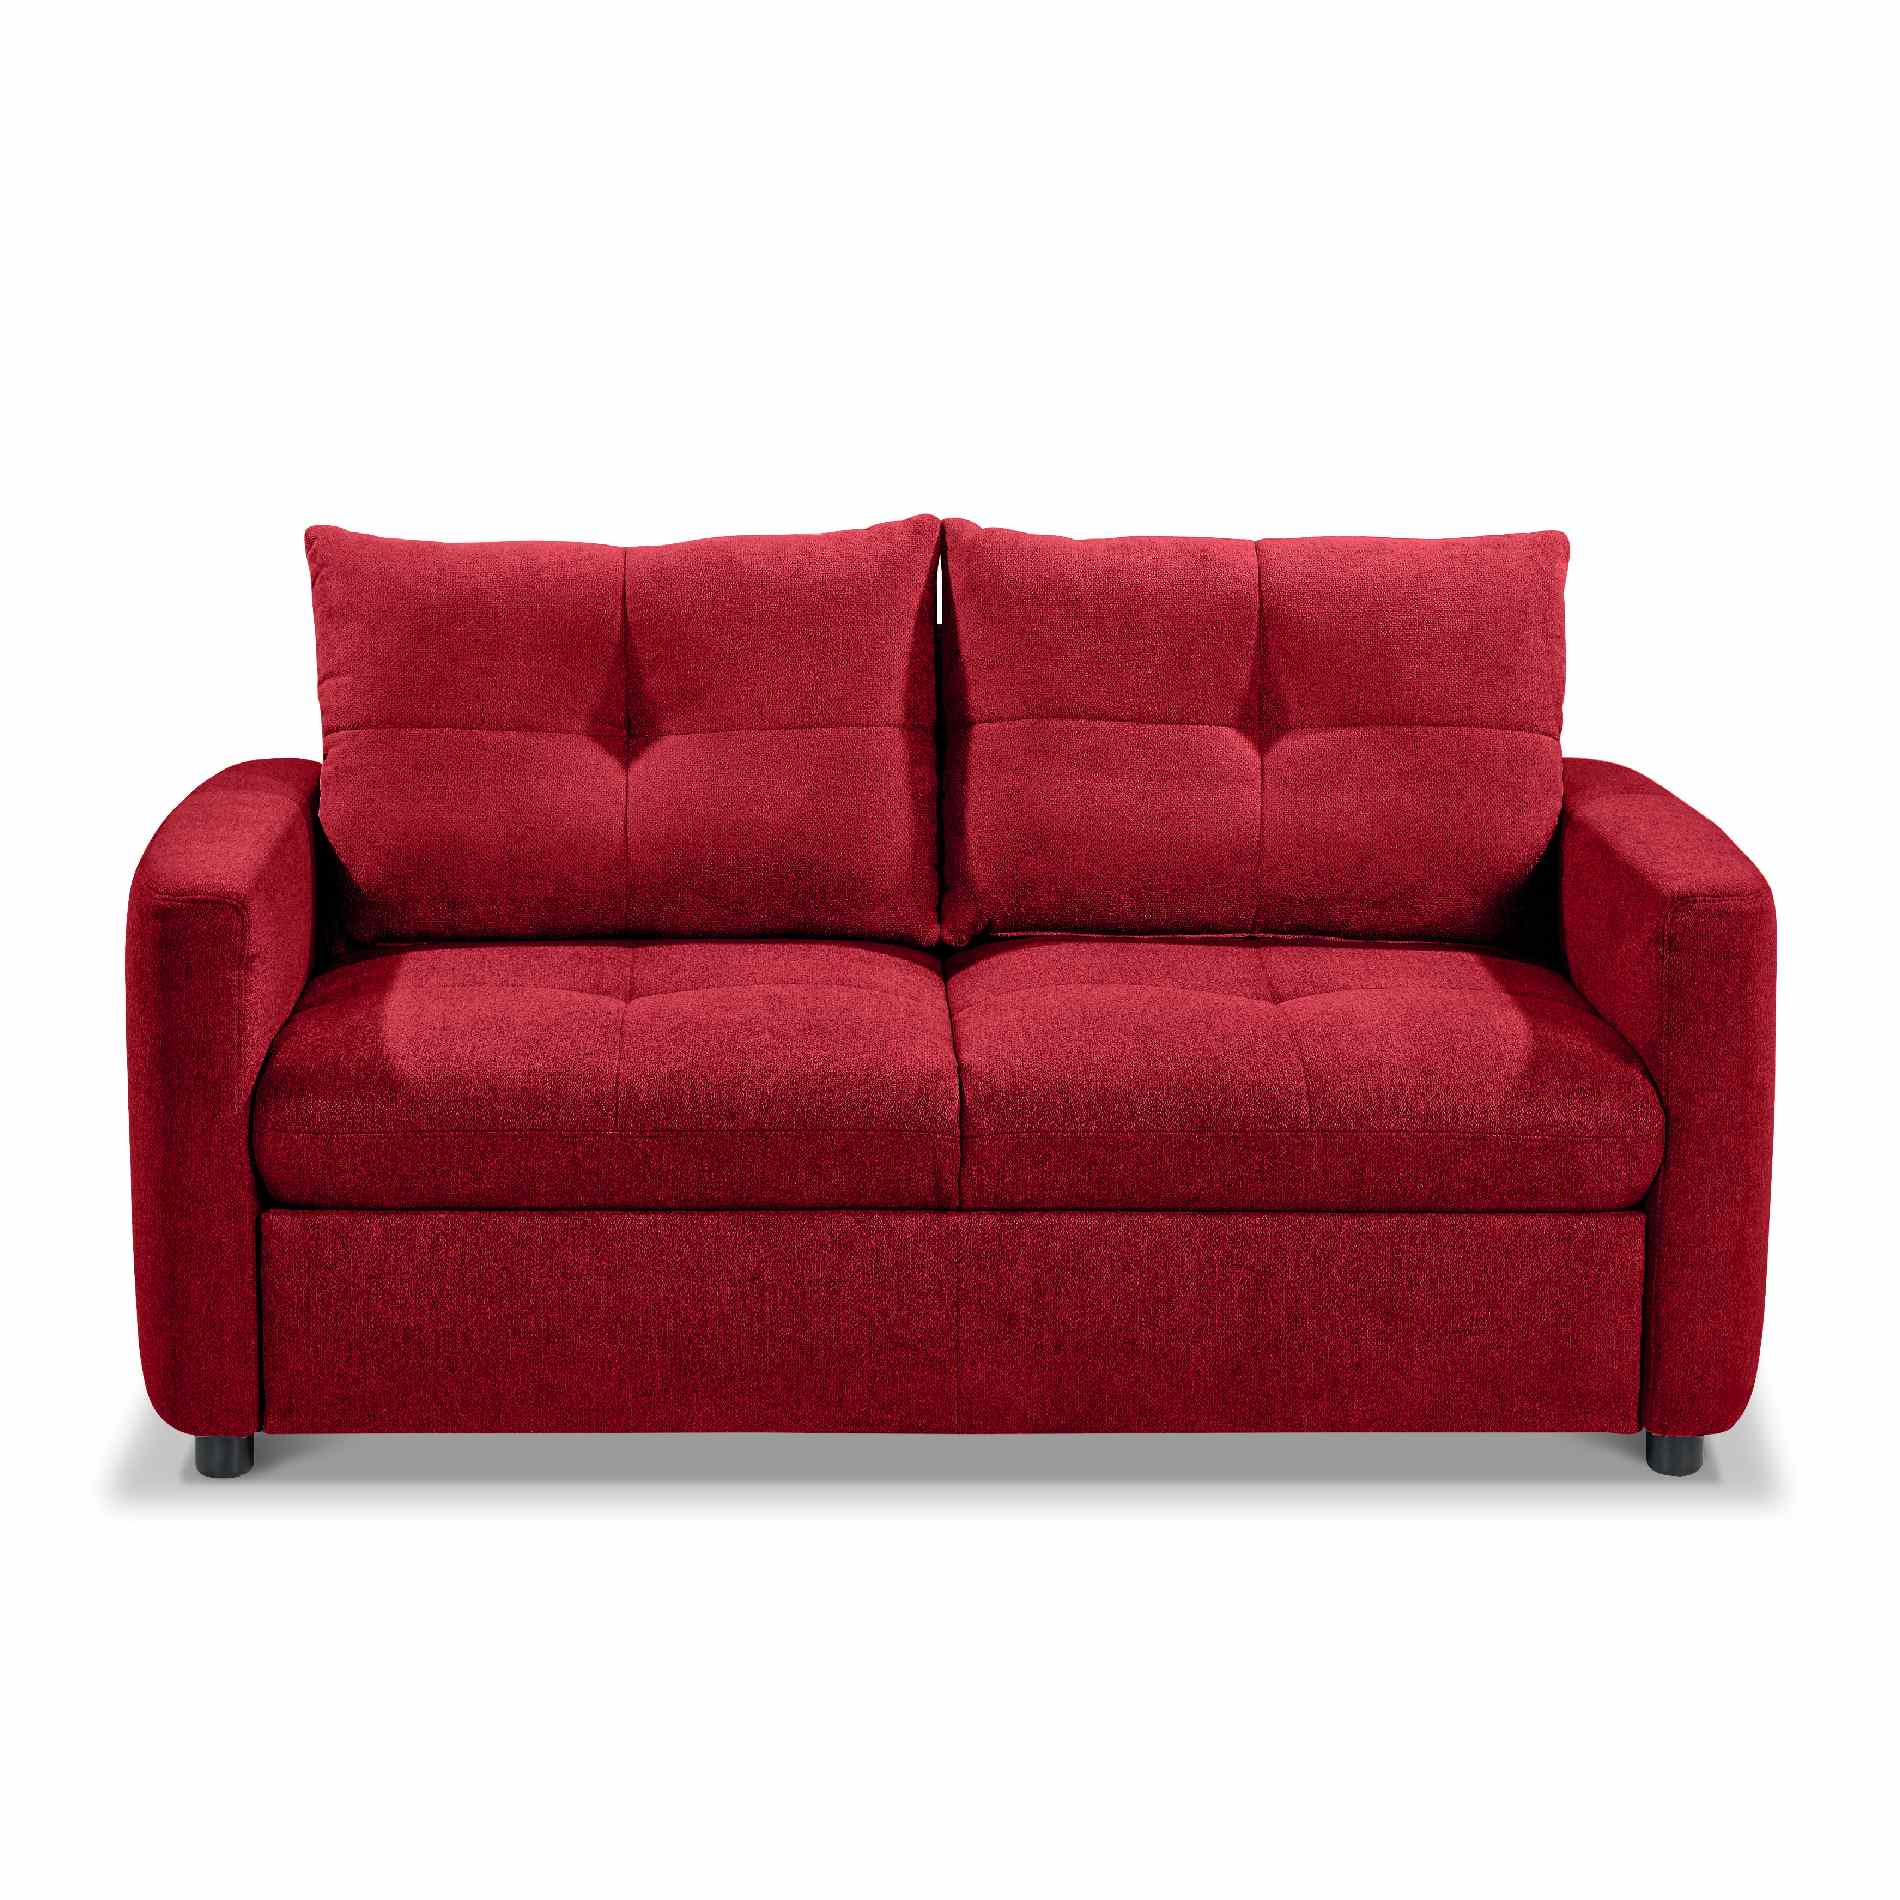 set one by Musterring SO 4200 Sofa Bezug bordeaux – Frontansicht